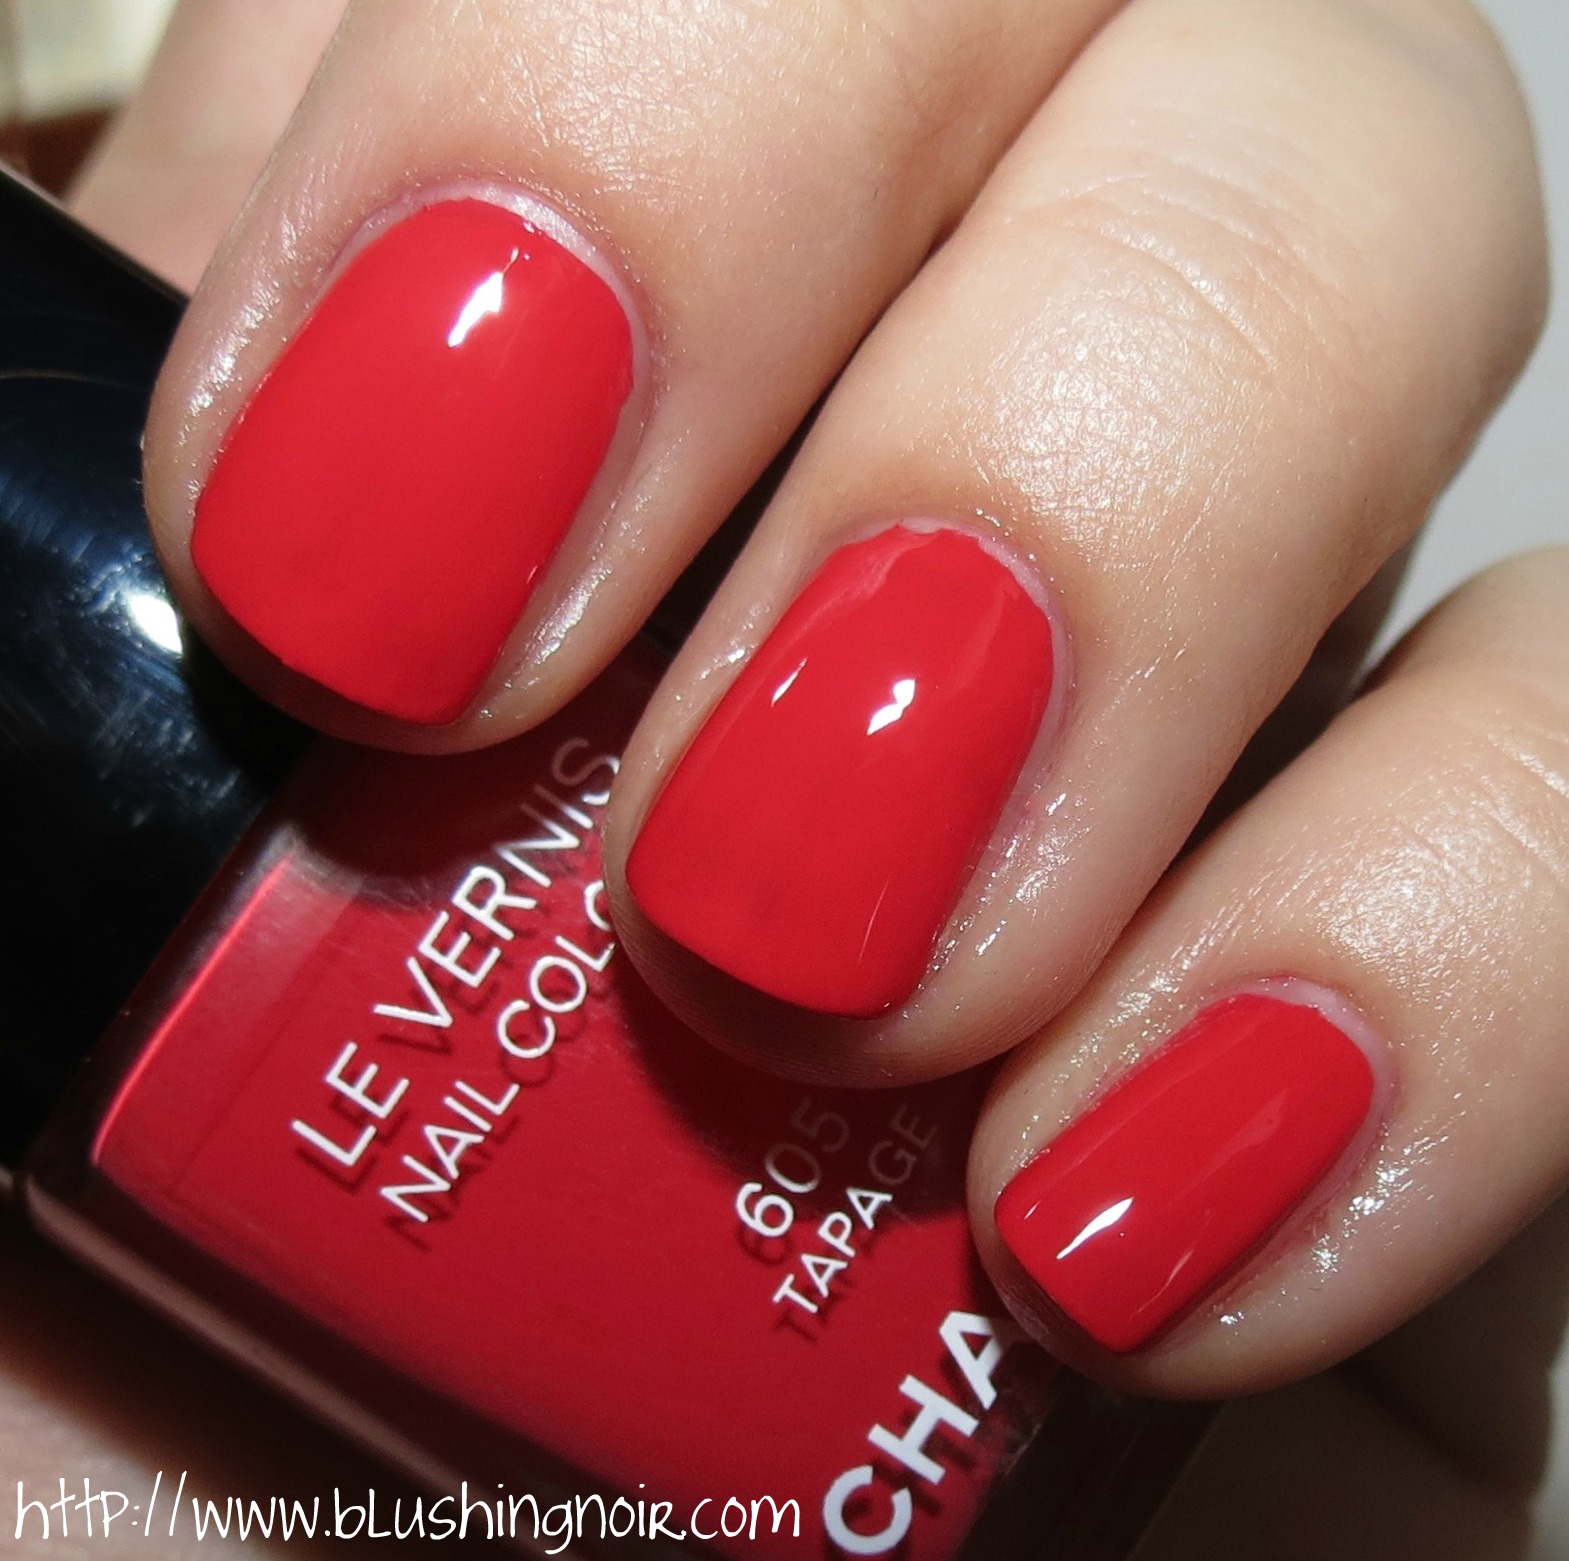 Chanel 605 TAPAGE Le Vernis Nail Colour Swatches & Review – Notes